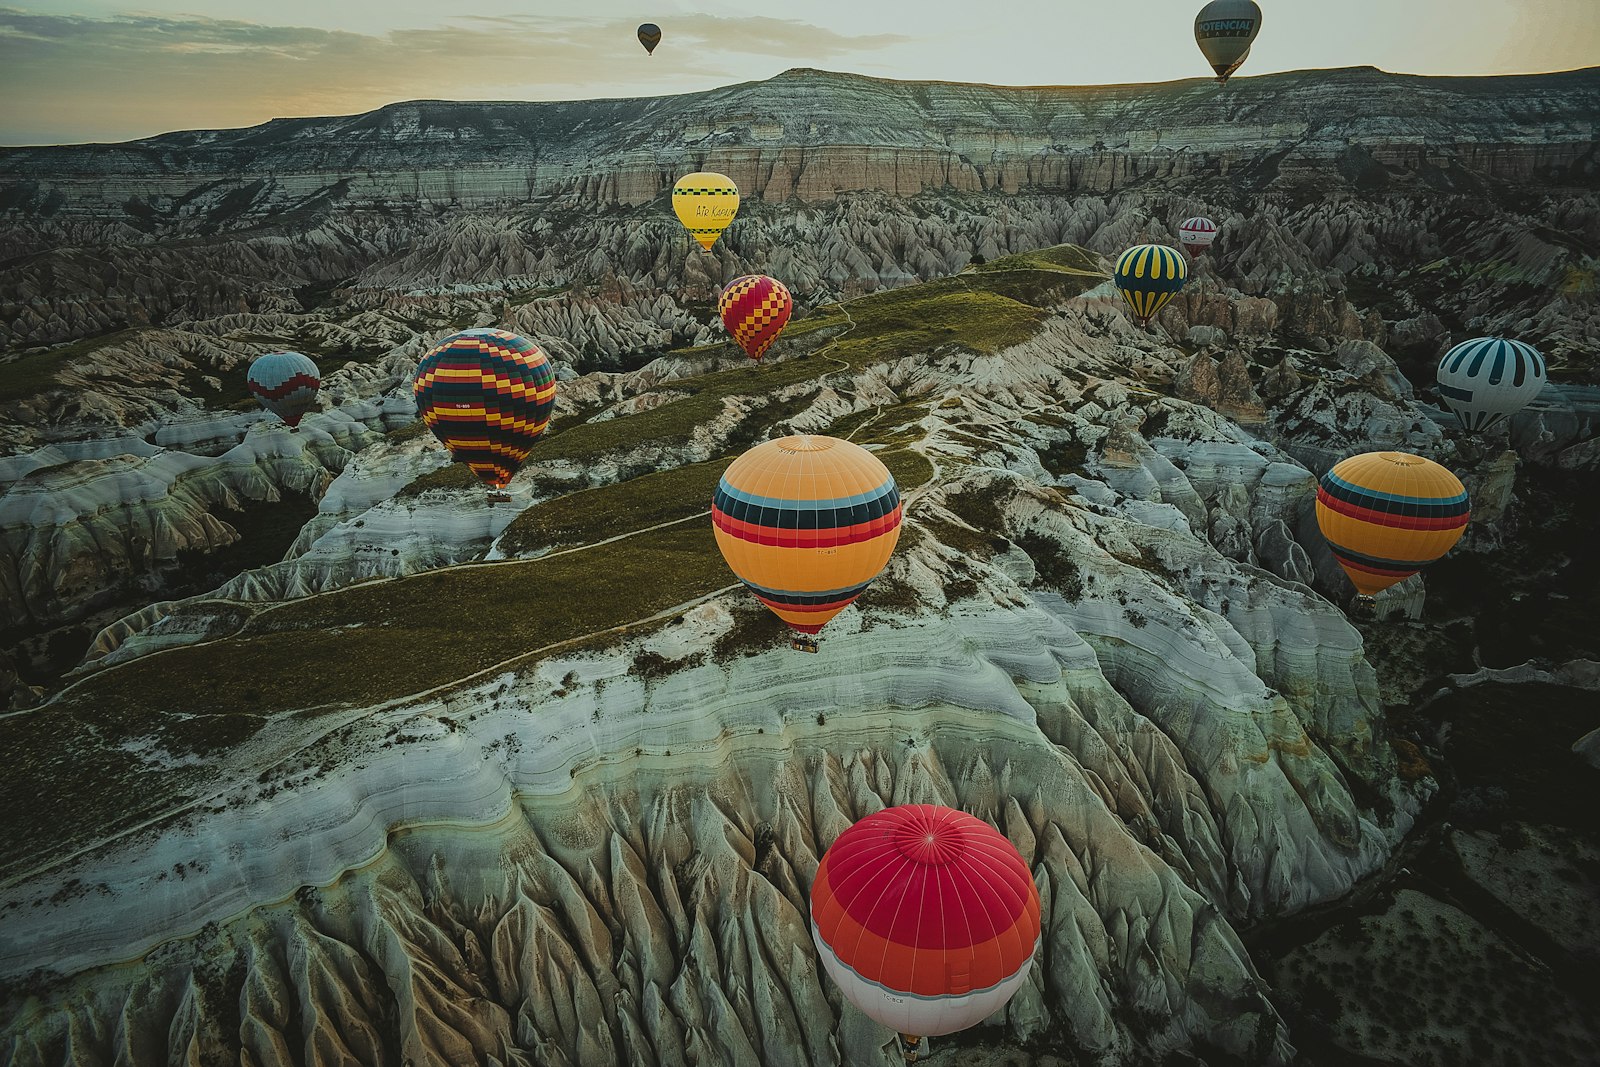 Sony a99 II + 20mm F2.8 sample photo. Assorted-color hot air balloons photography